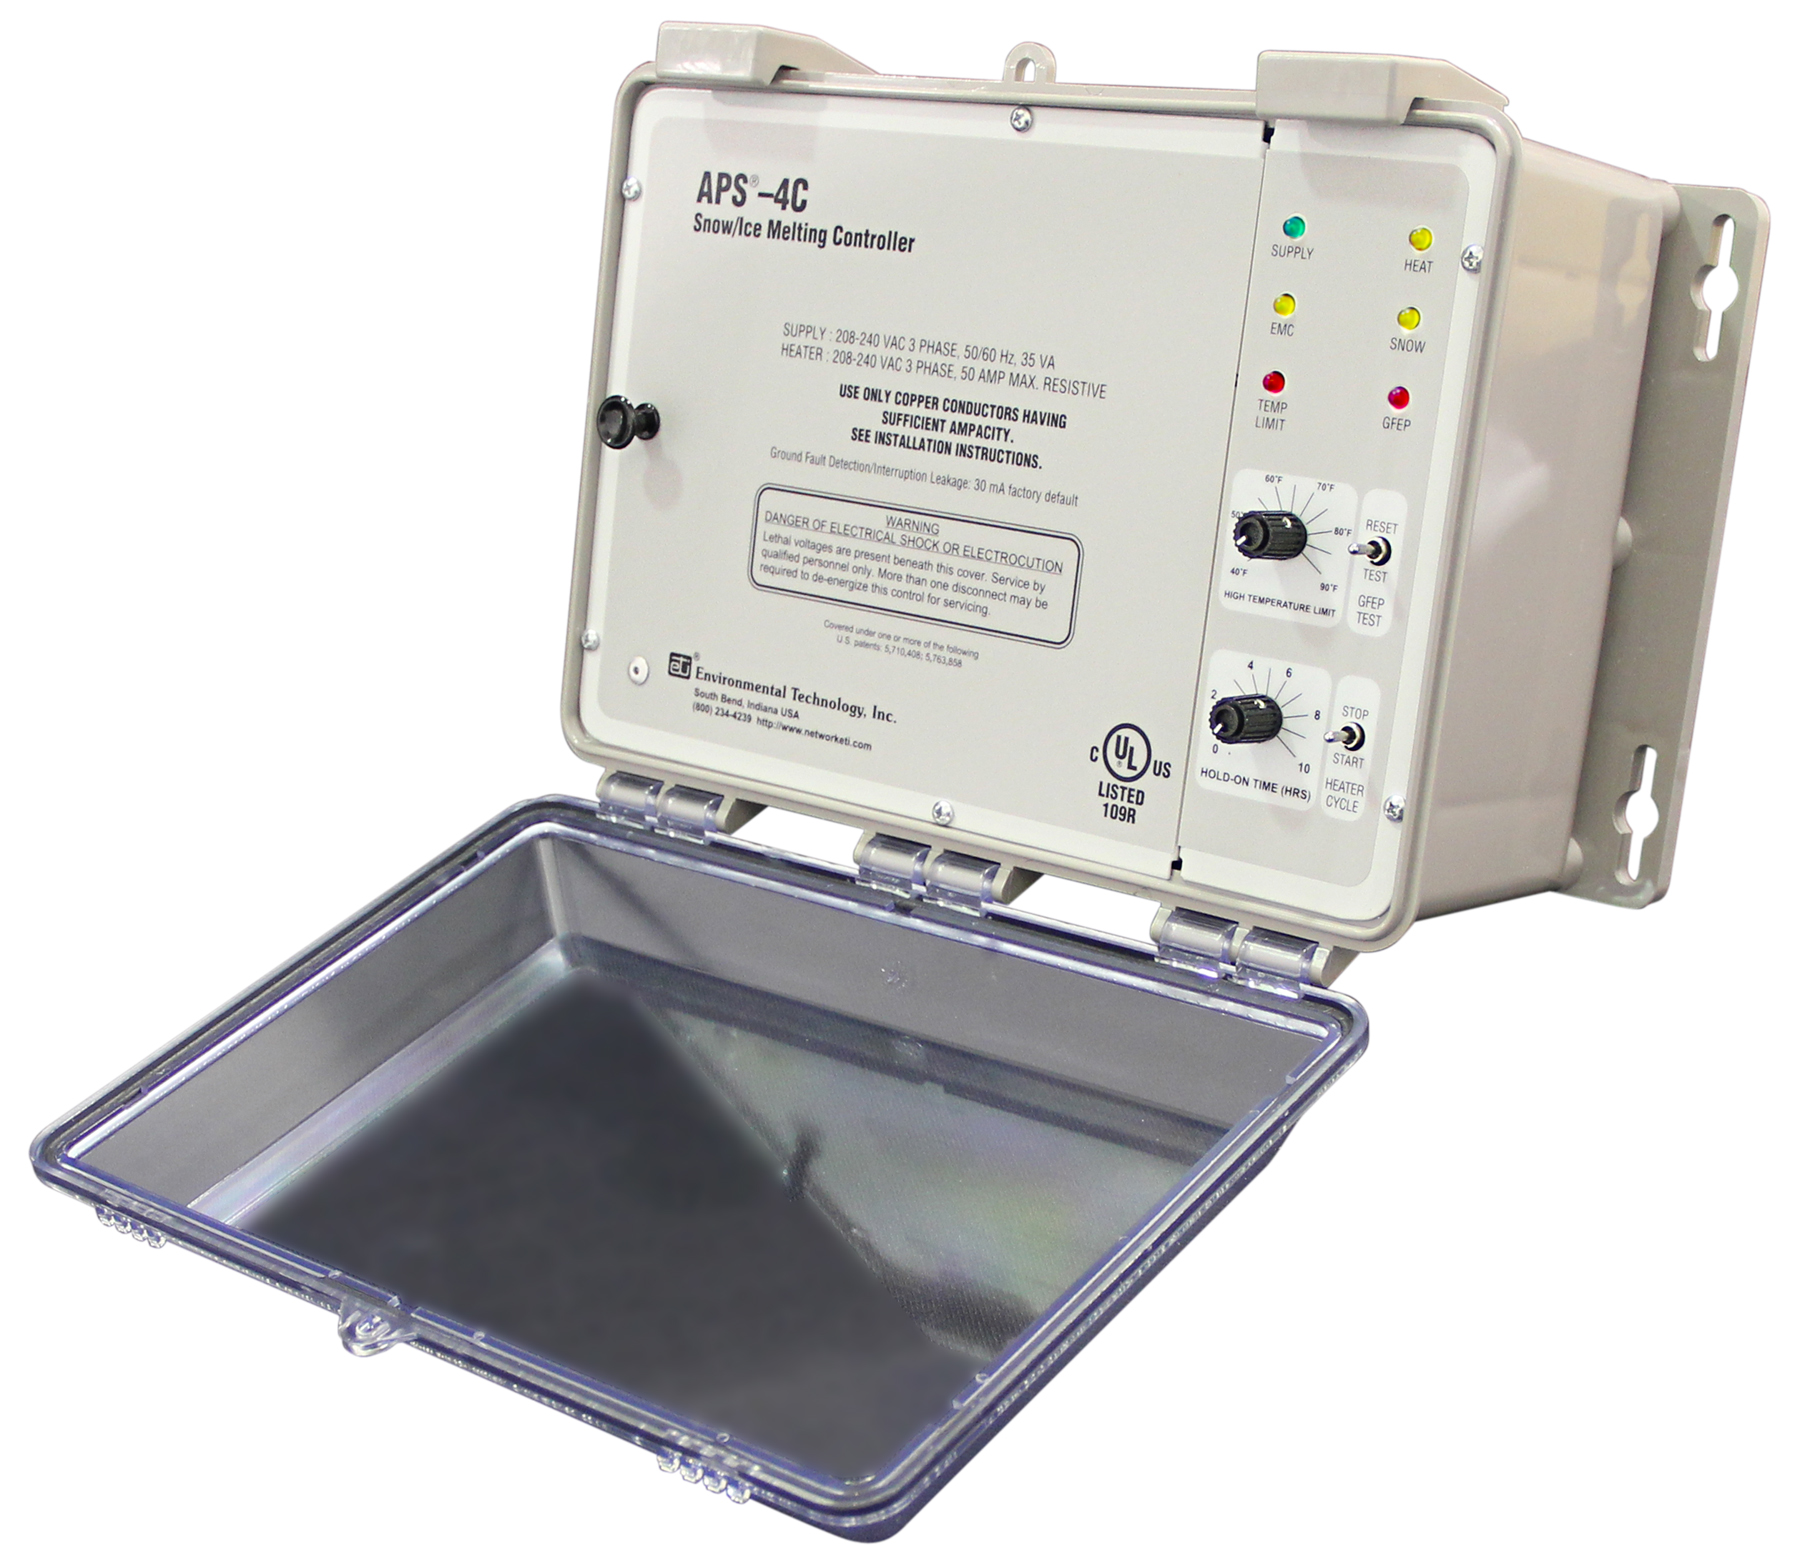 The Snow Switch Model APS-4C Snow/Ice Melting Control is designed to be used with another compatible heater control.